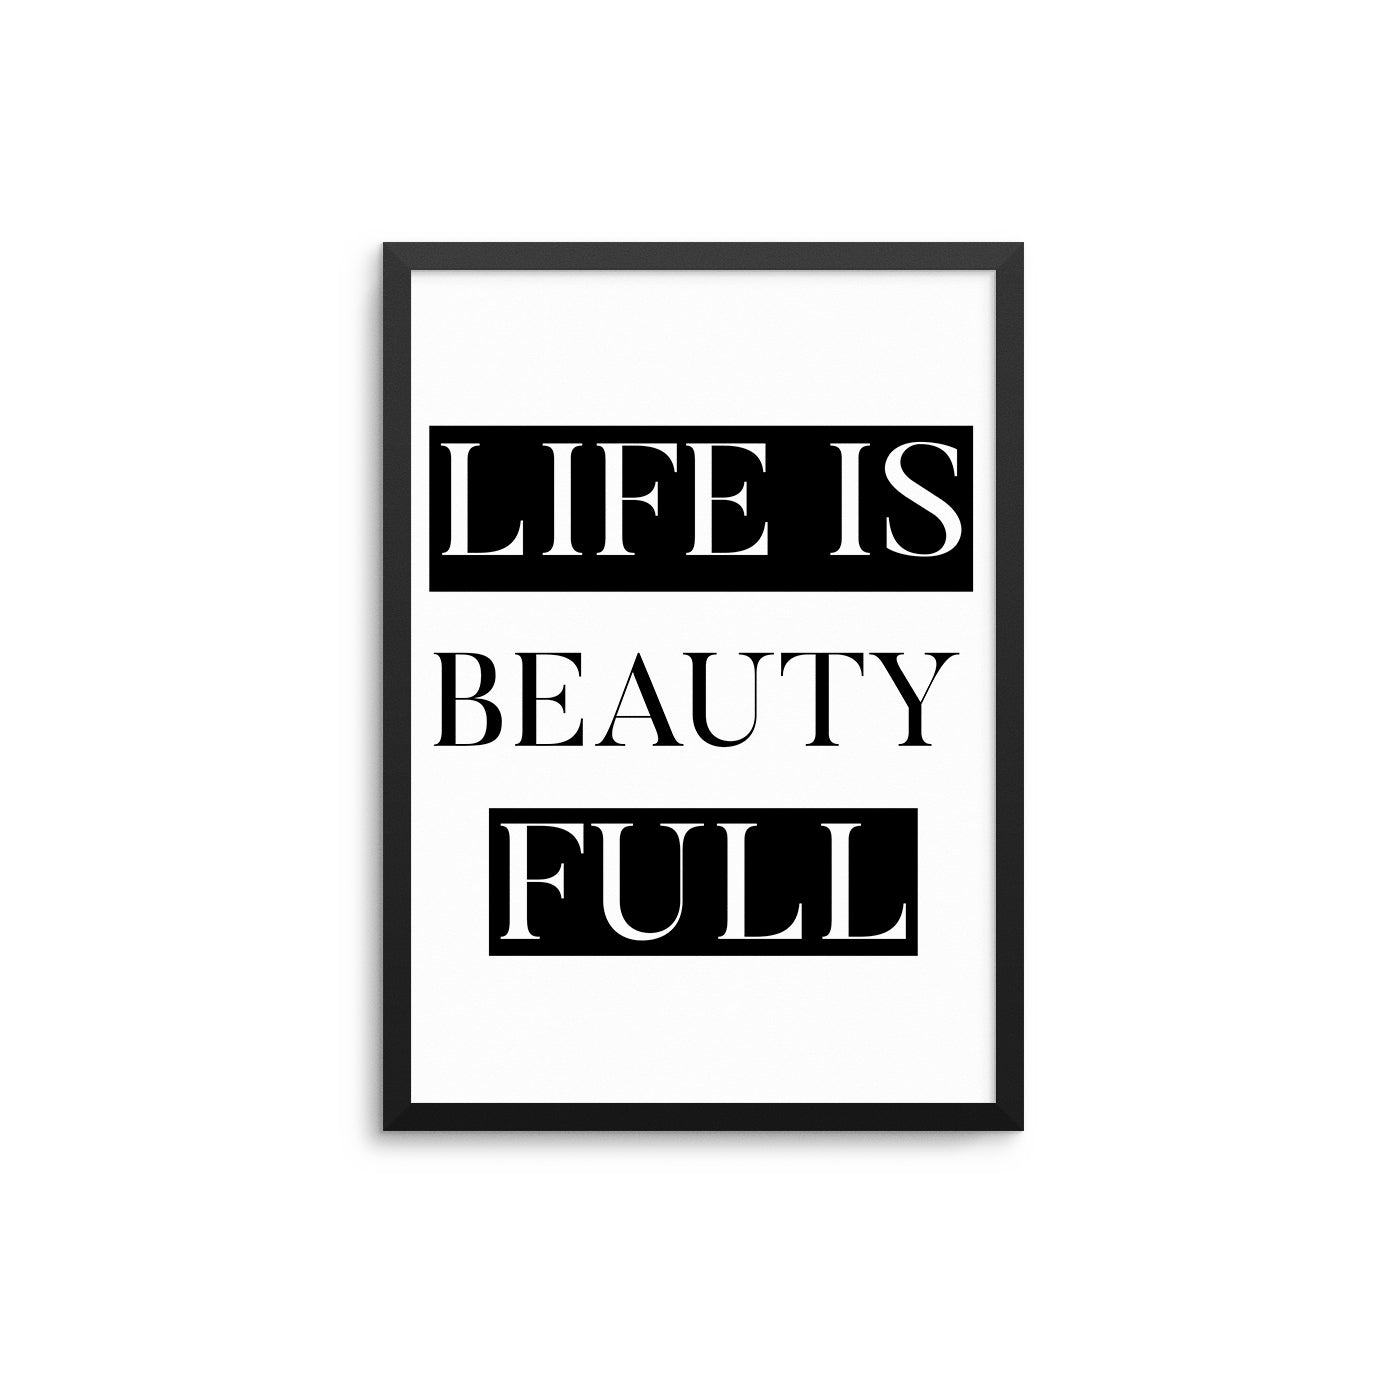 Life Is Beauty Full - D'Luxe Prints